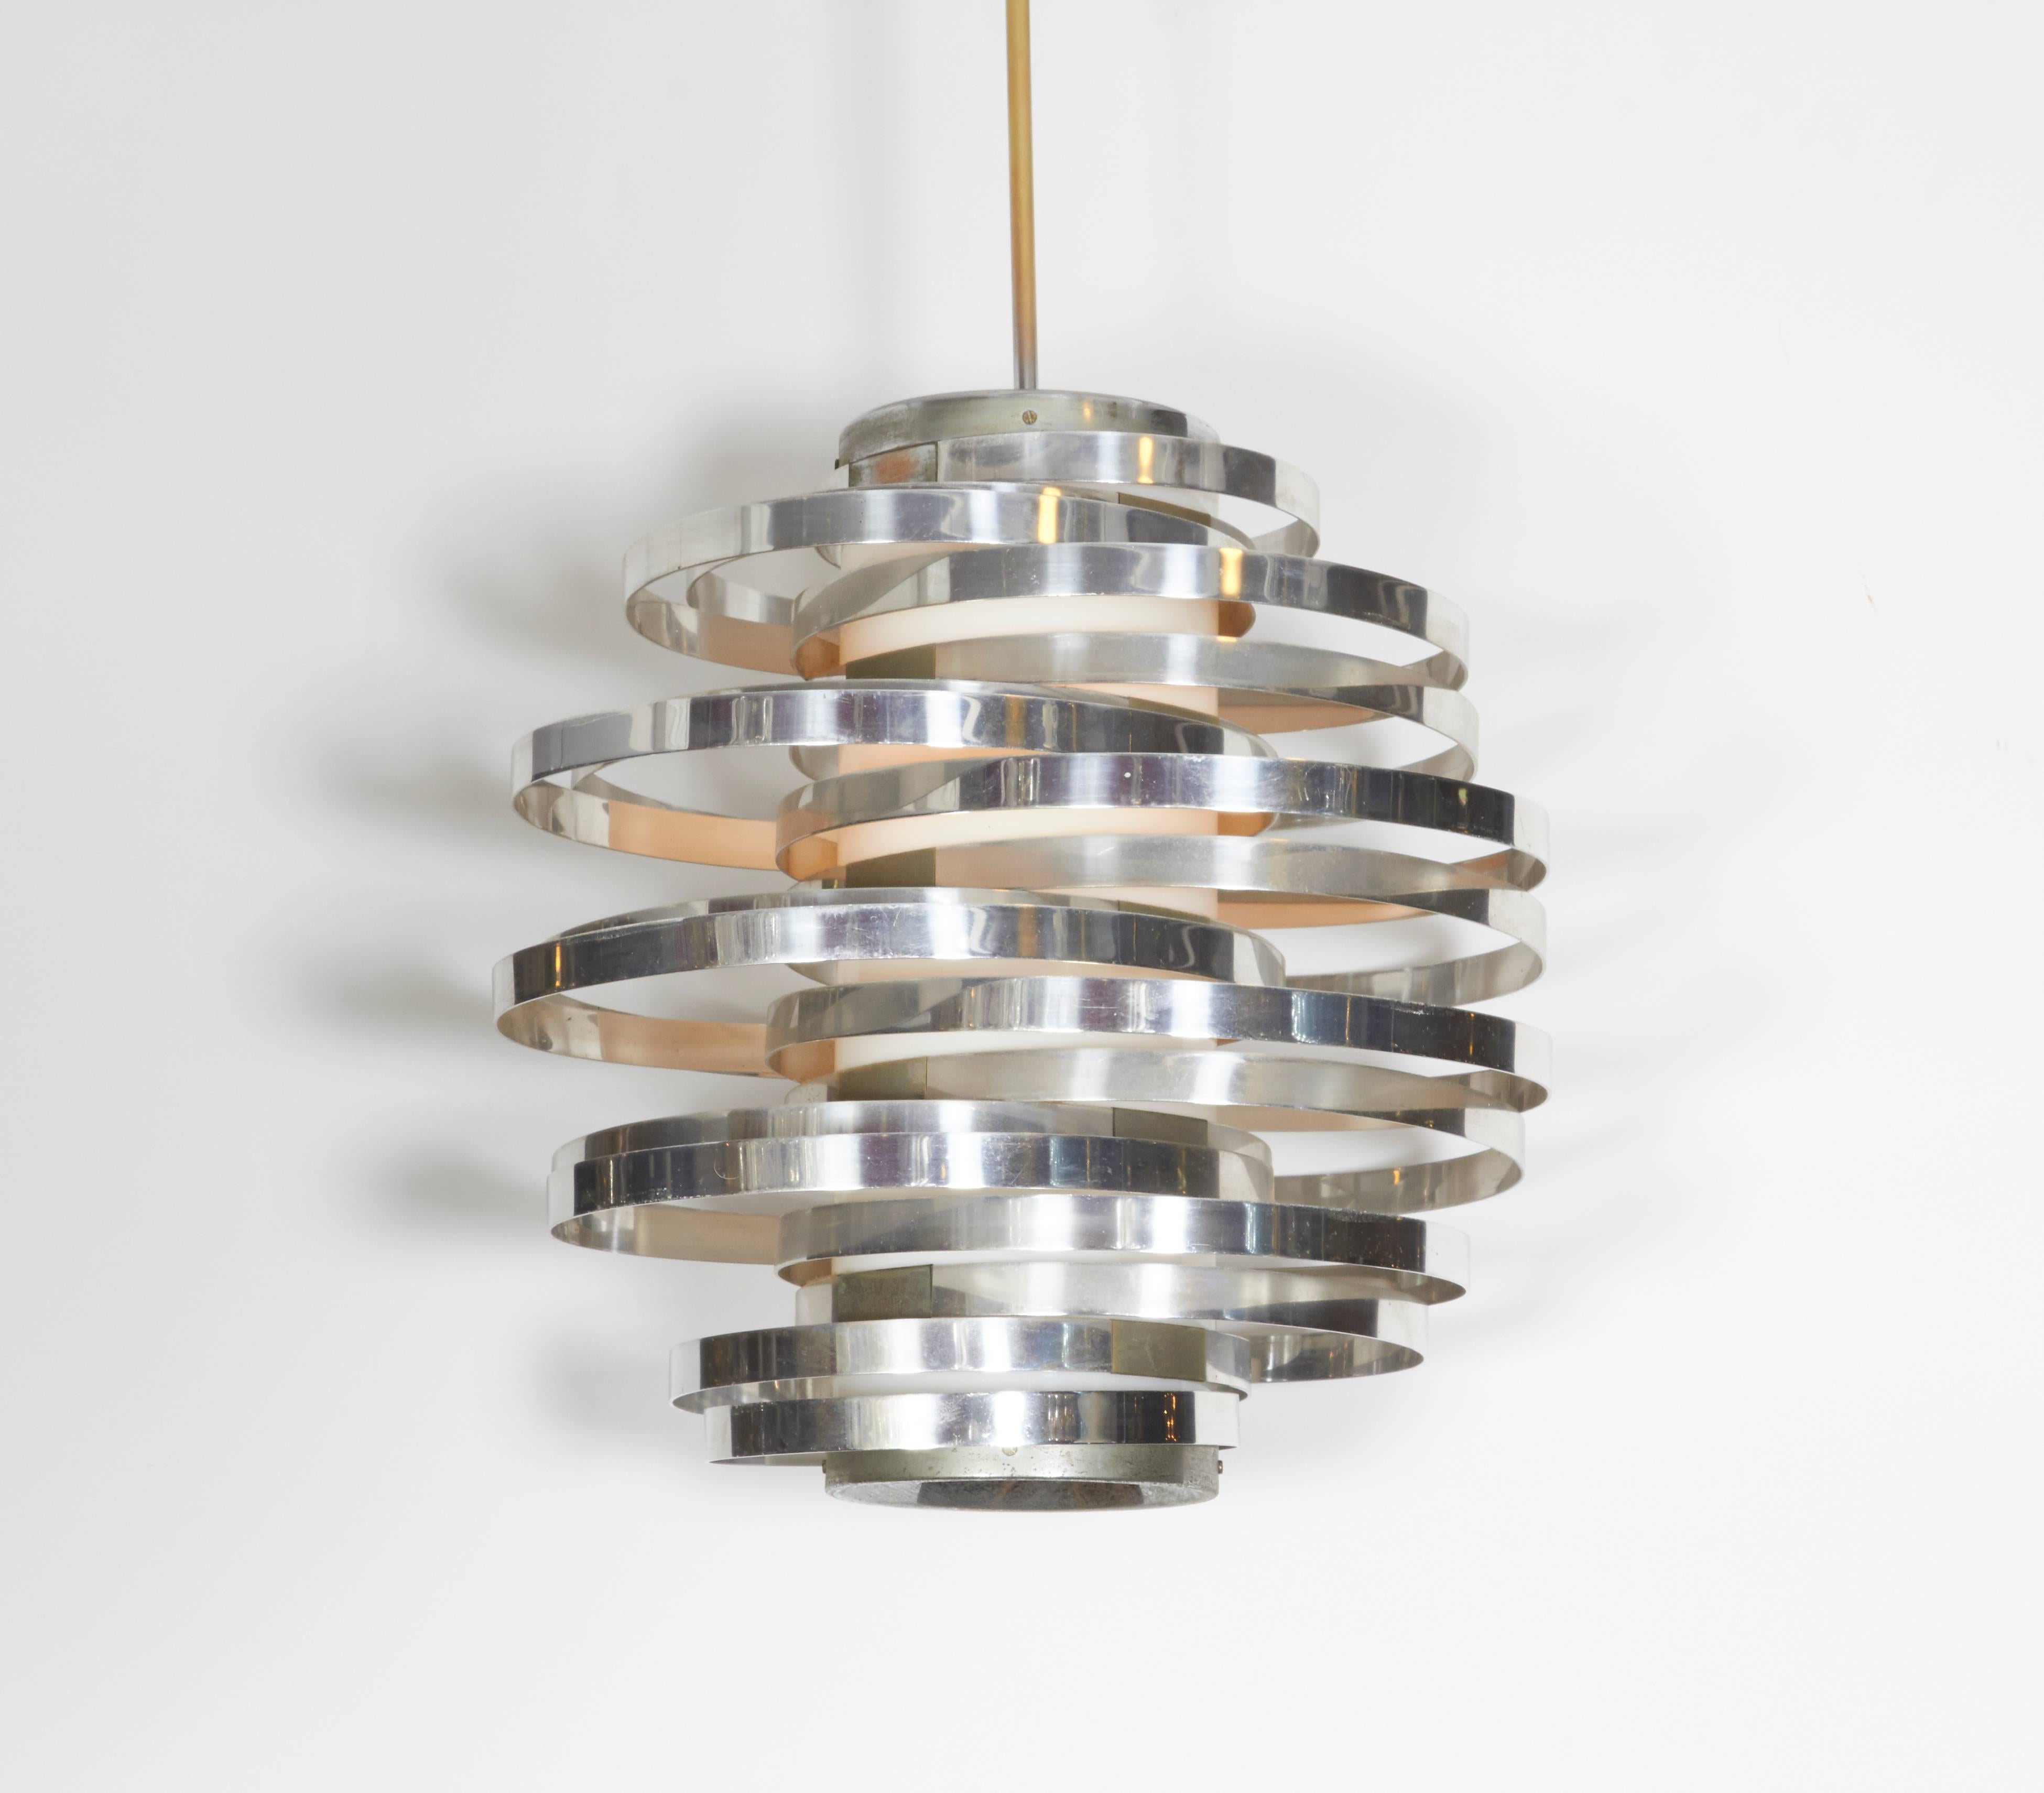 This Italian, circa 1960s pendant chandelier, designed by Max Sauze for Sciolari, comes with central plexiglass cylinder, encircled by syncopated bands of polished aluminium. Wiring and socket to US standard. Dimensions provided reflect body. This